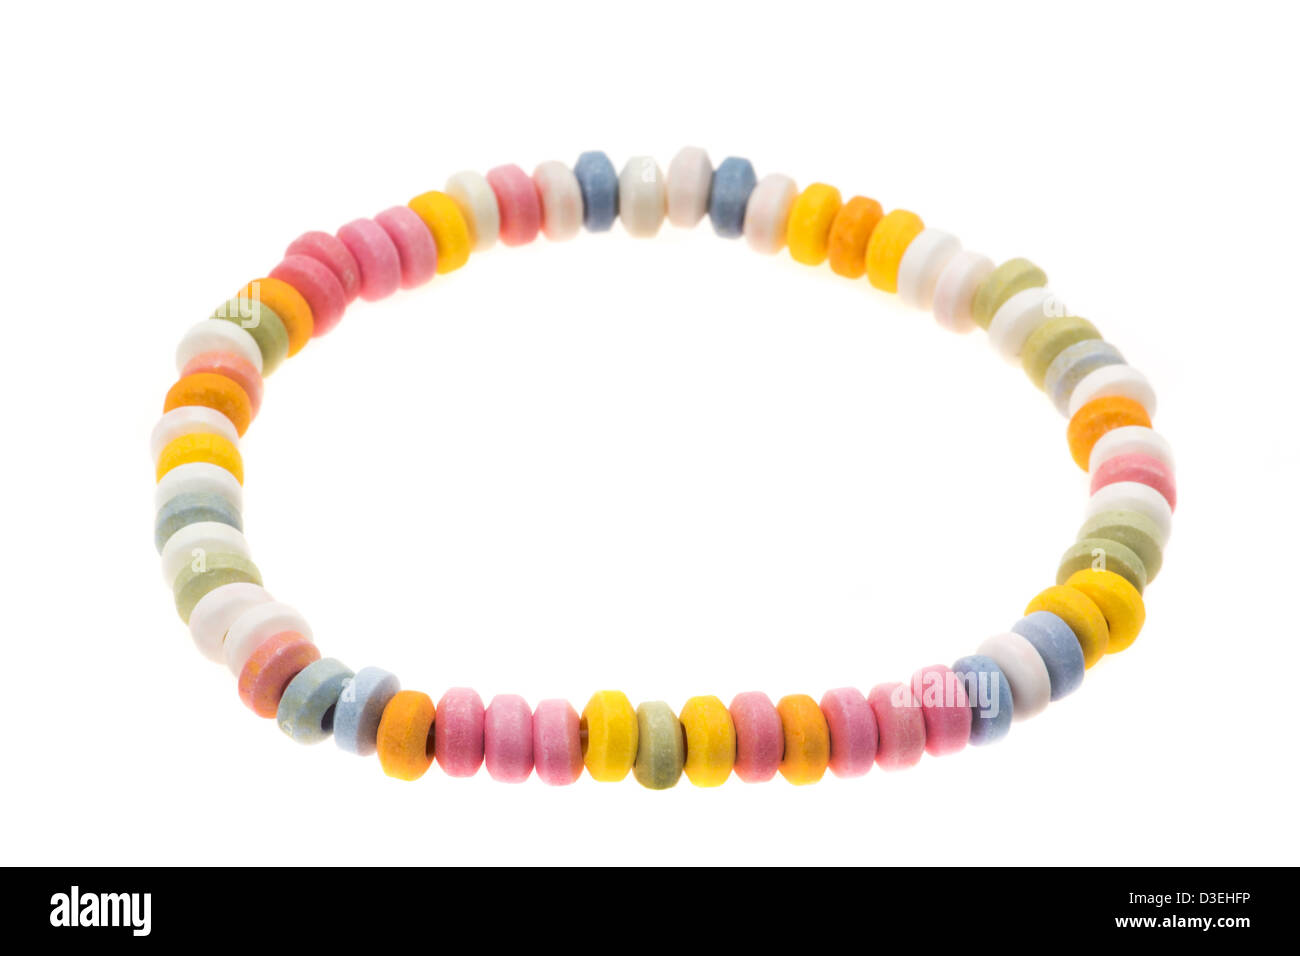 Candy Bead Bracelet, Edible Candy Jewelry